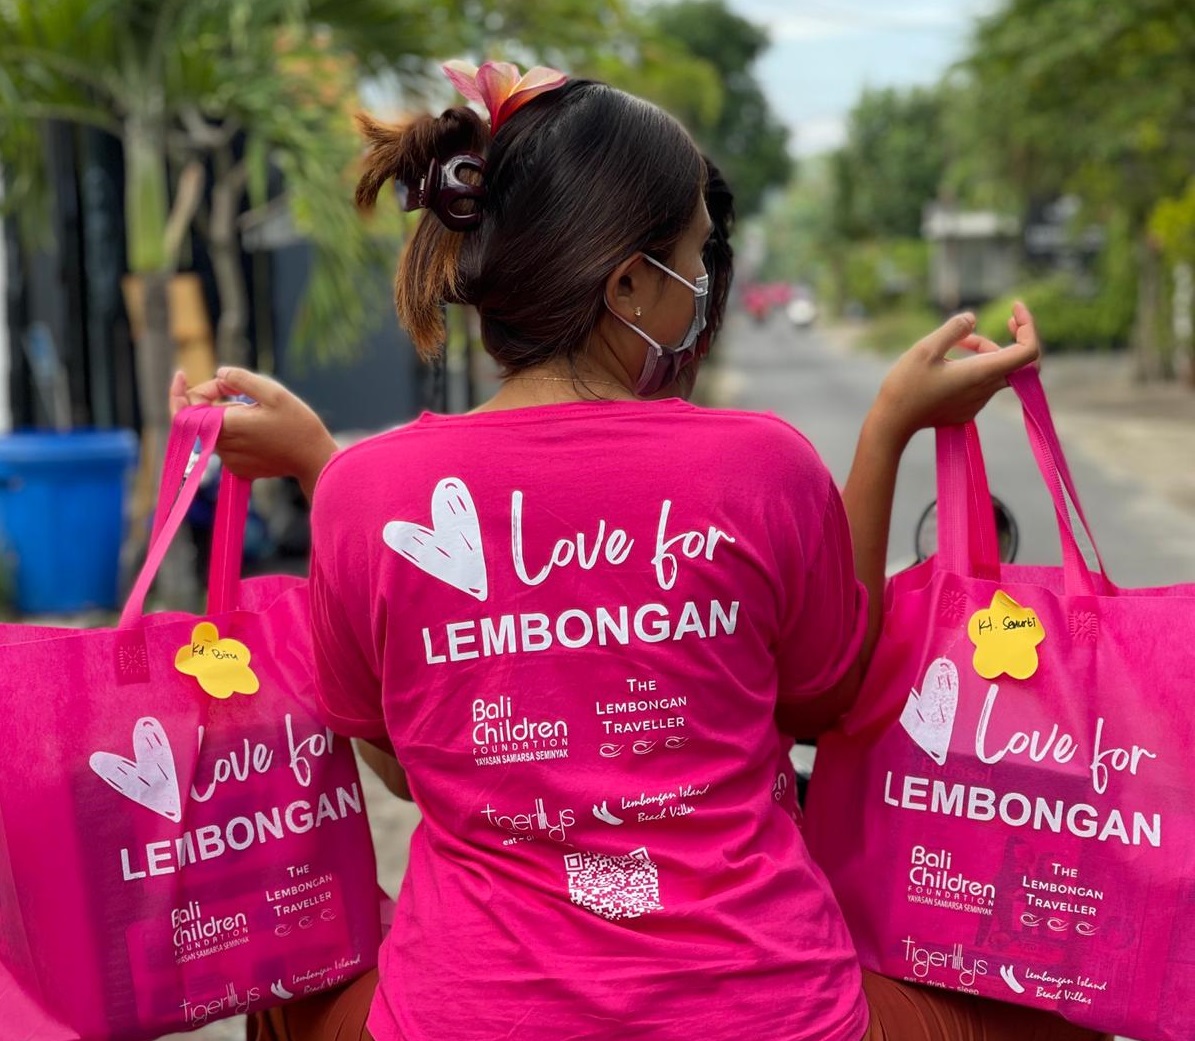 Why Book with The Lembongan Traveller, Love for Lembongan, Lembongan Lembongan Hotels, Lembongan Resorts, Lembongan Bungalows, Lembongan Villas, The Lembongan Traveller, Nusa Lembongan Hotels, Nusa Lembongan Resorts, Nusa Lembongan Bungalows, Nusa Lembongan Villas,